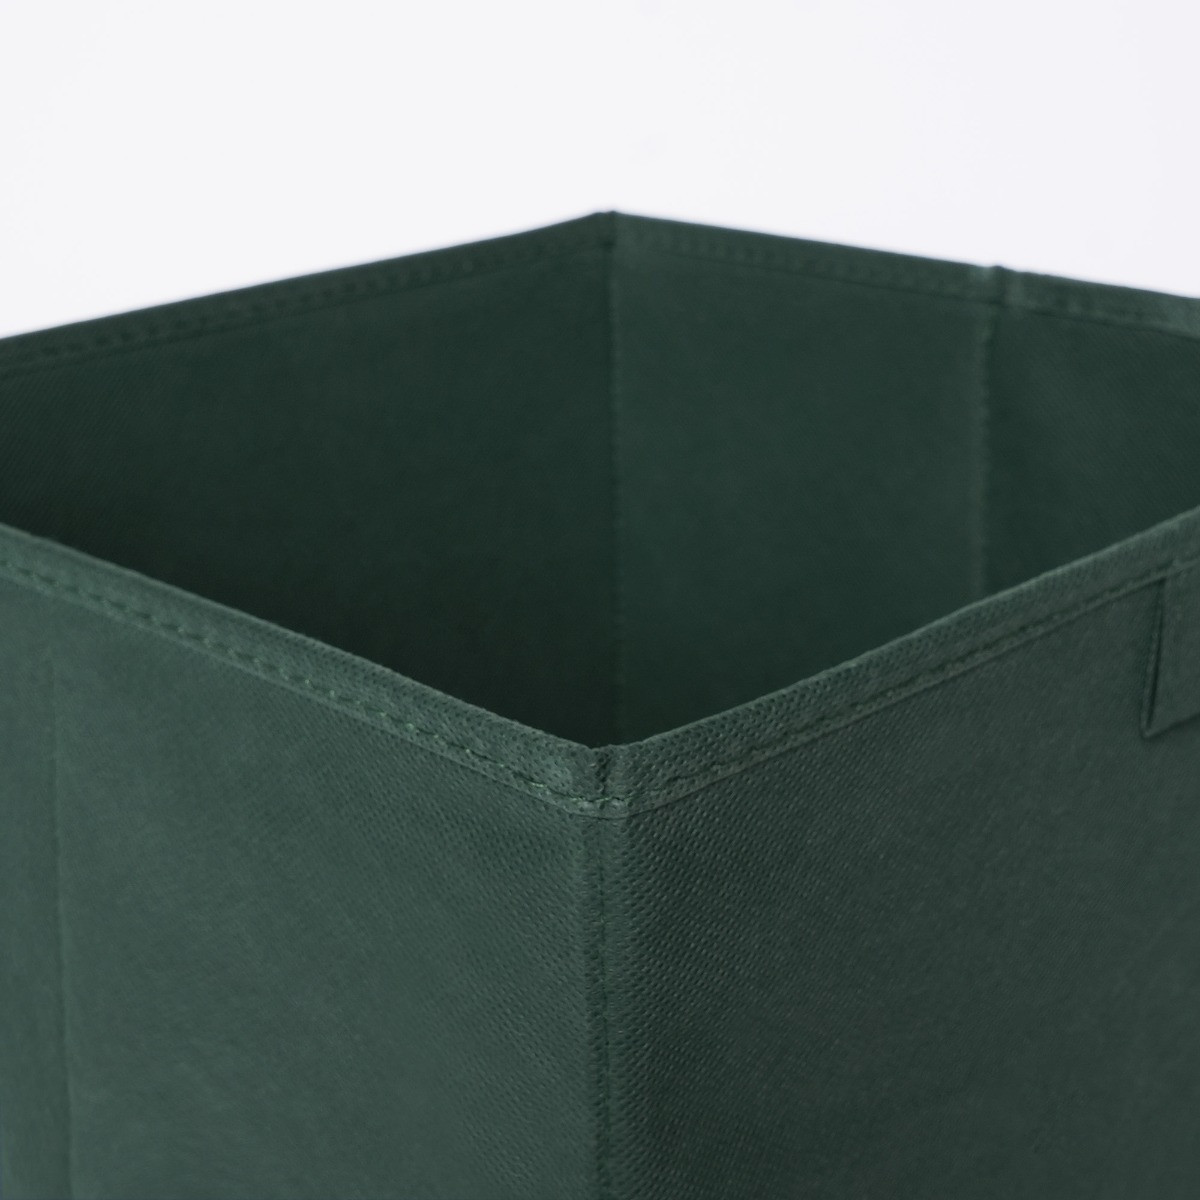 OHS Plain Cube Storage Boxes, Forest Green - 2 Pack>